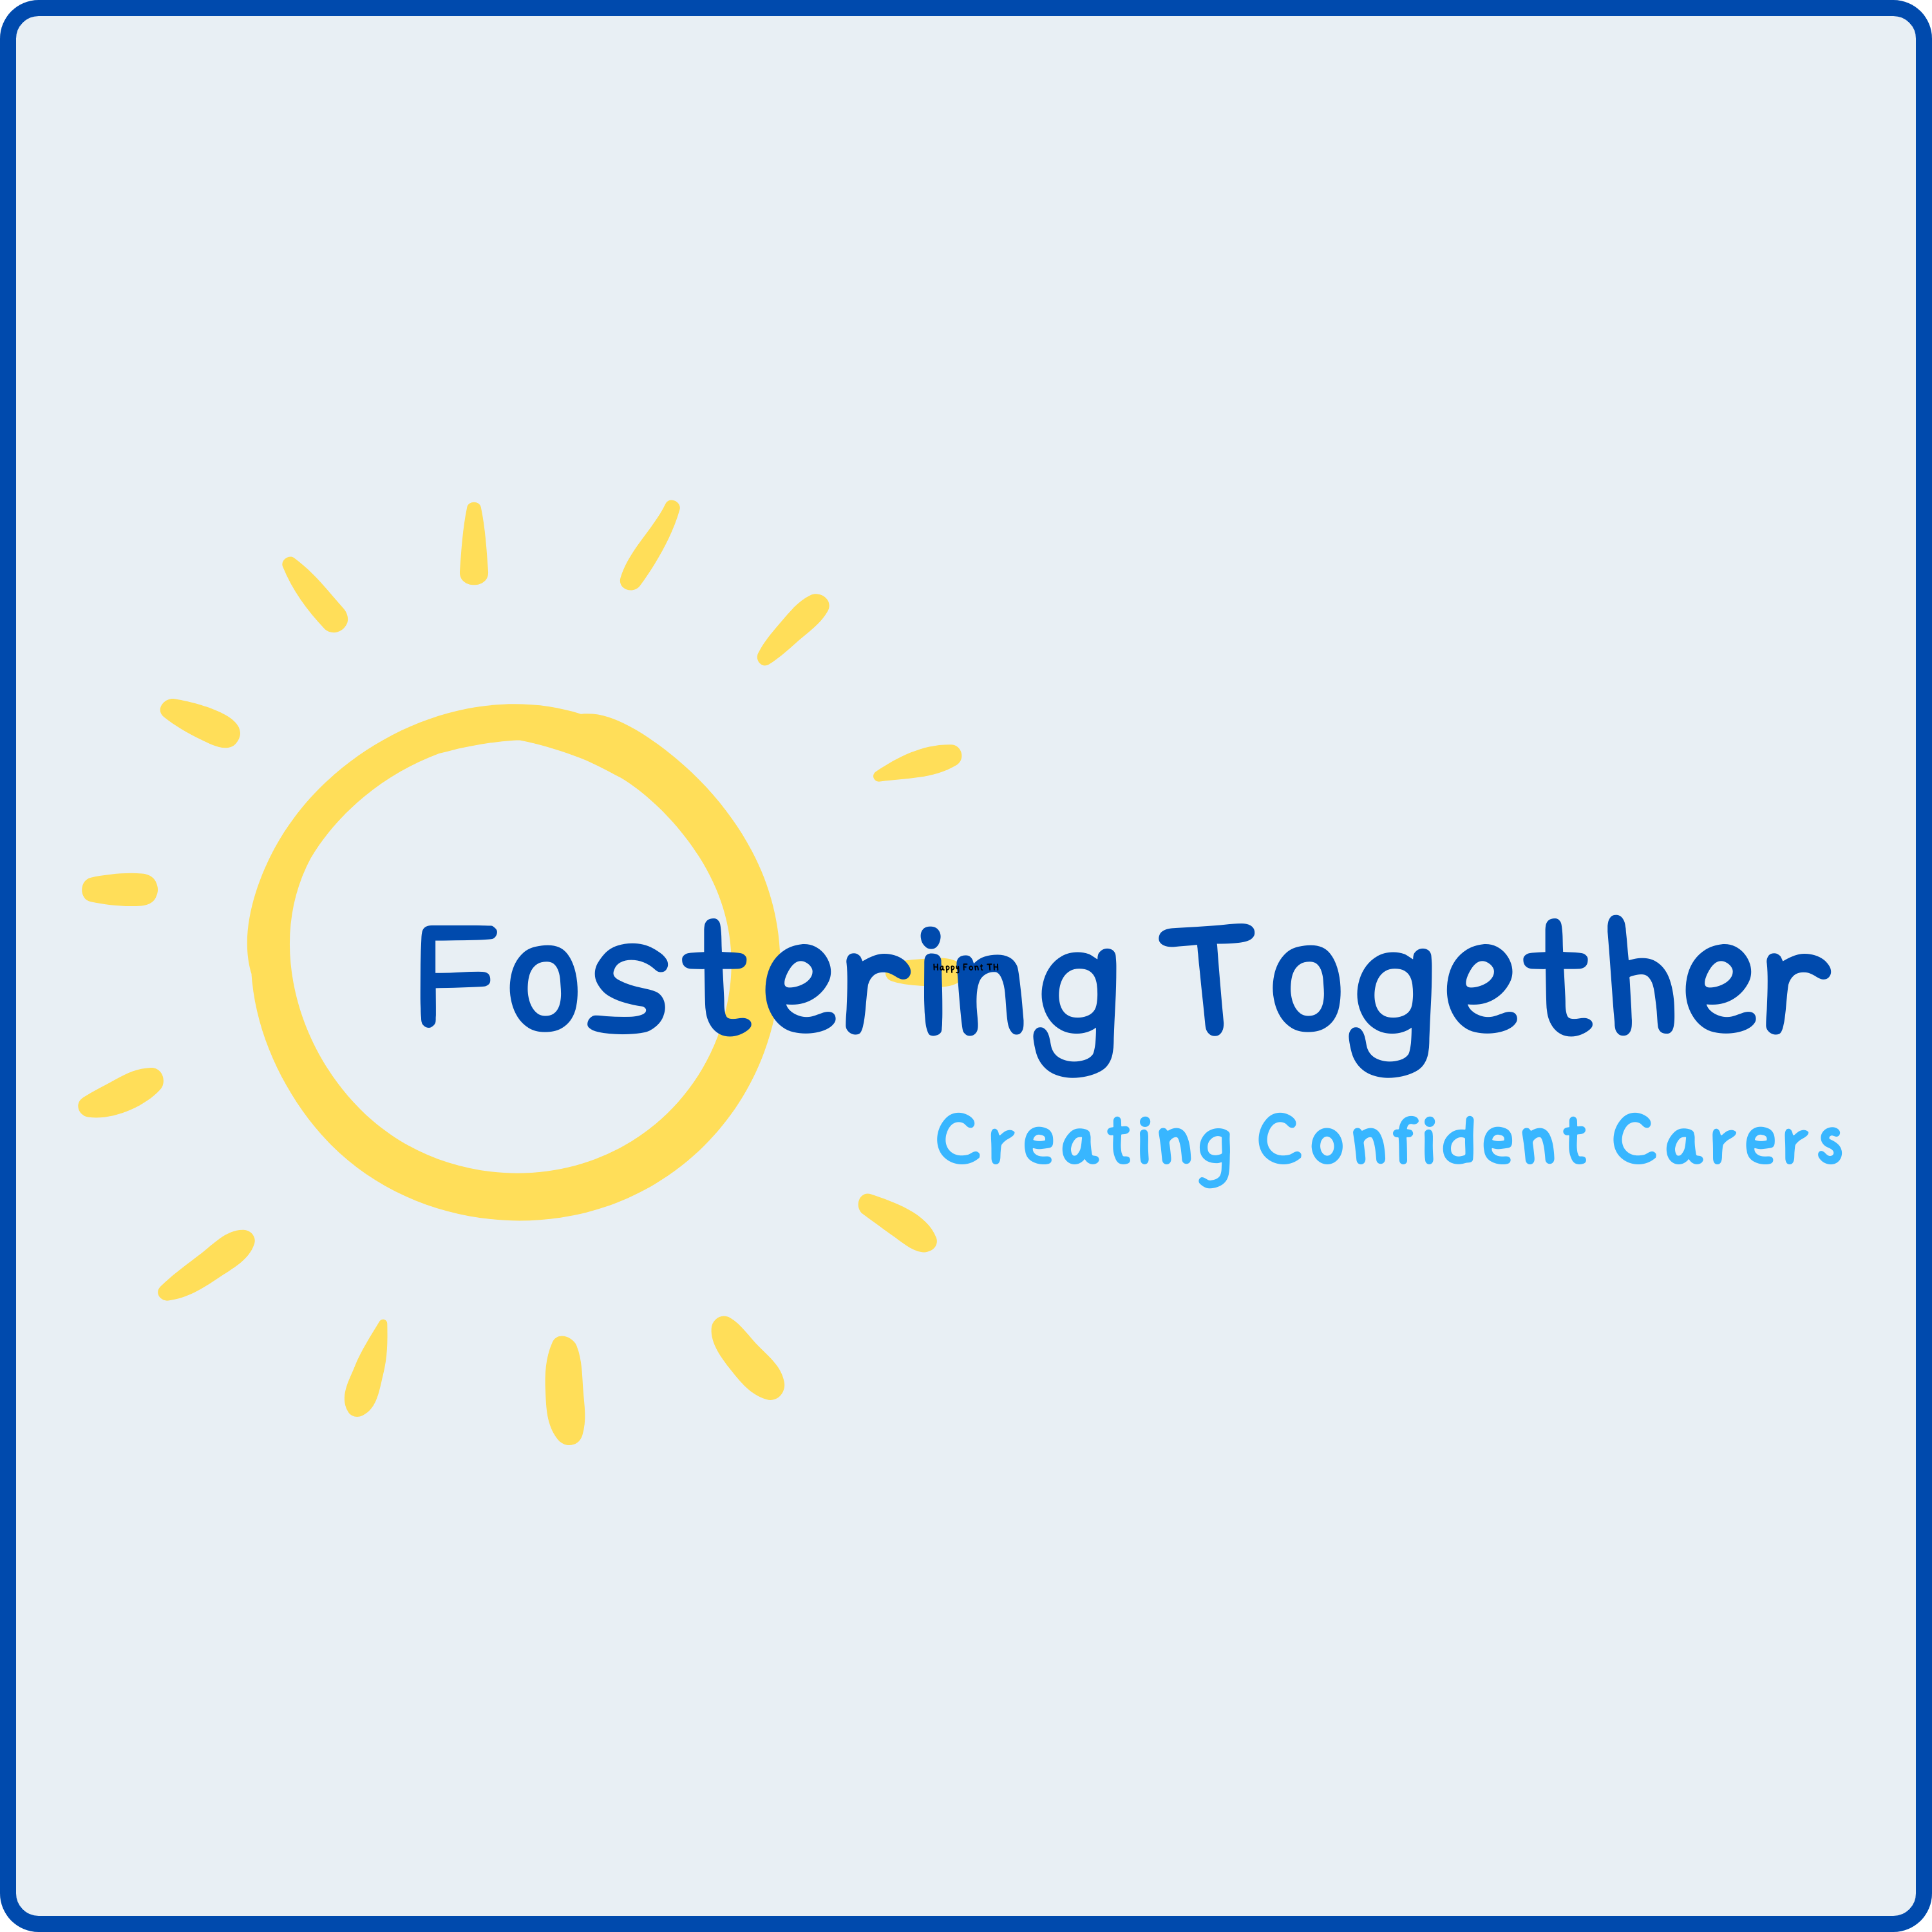 Why "Fostering Together"?